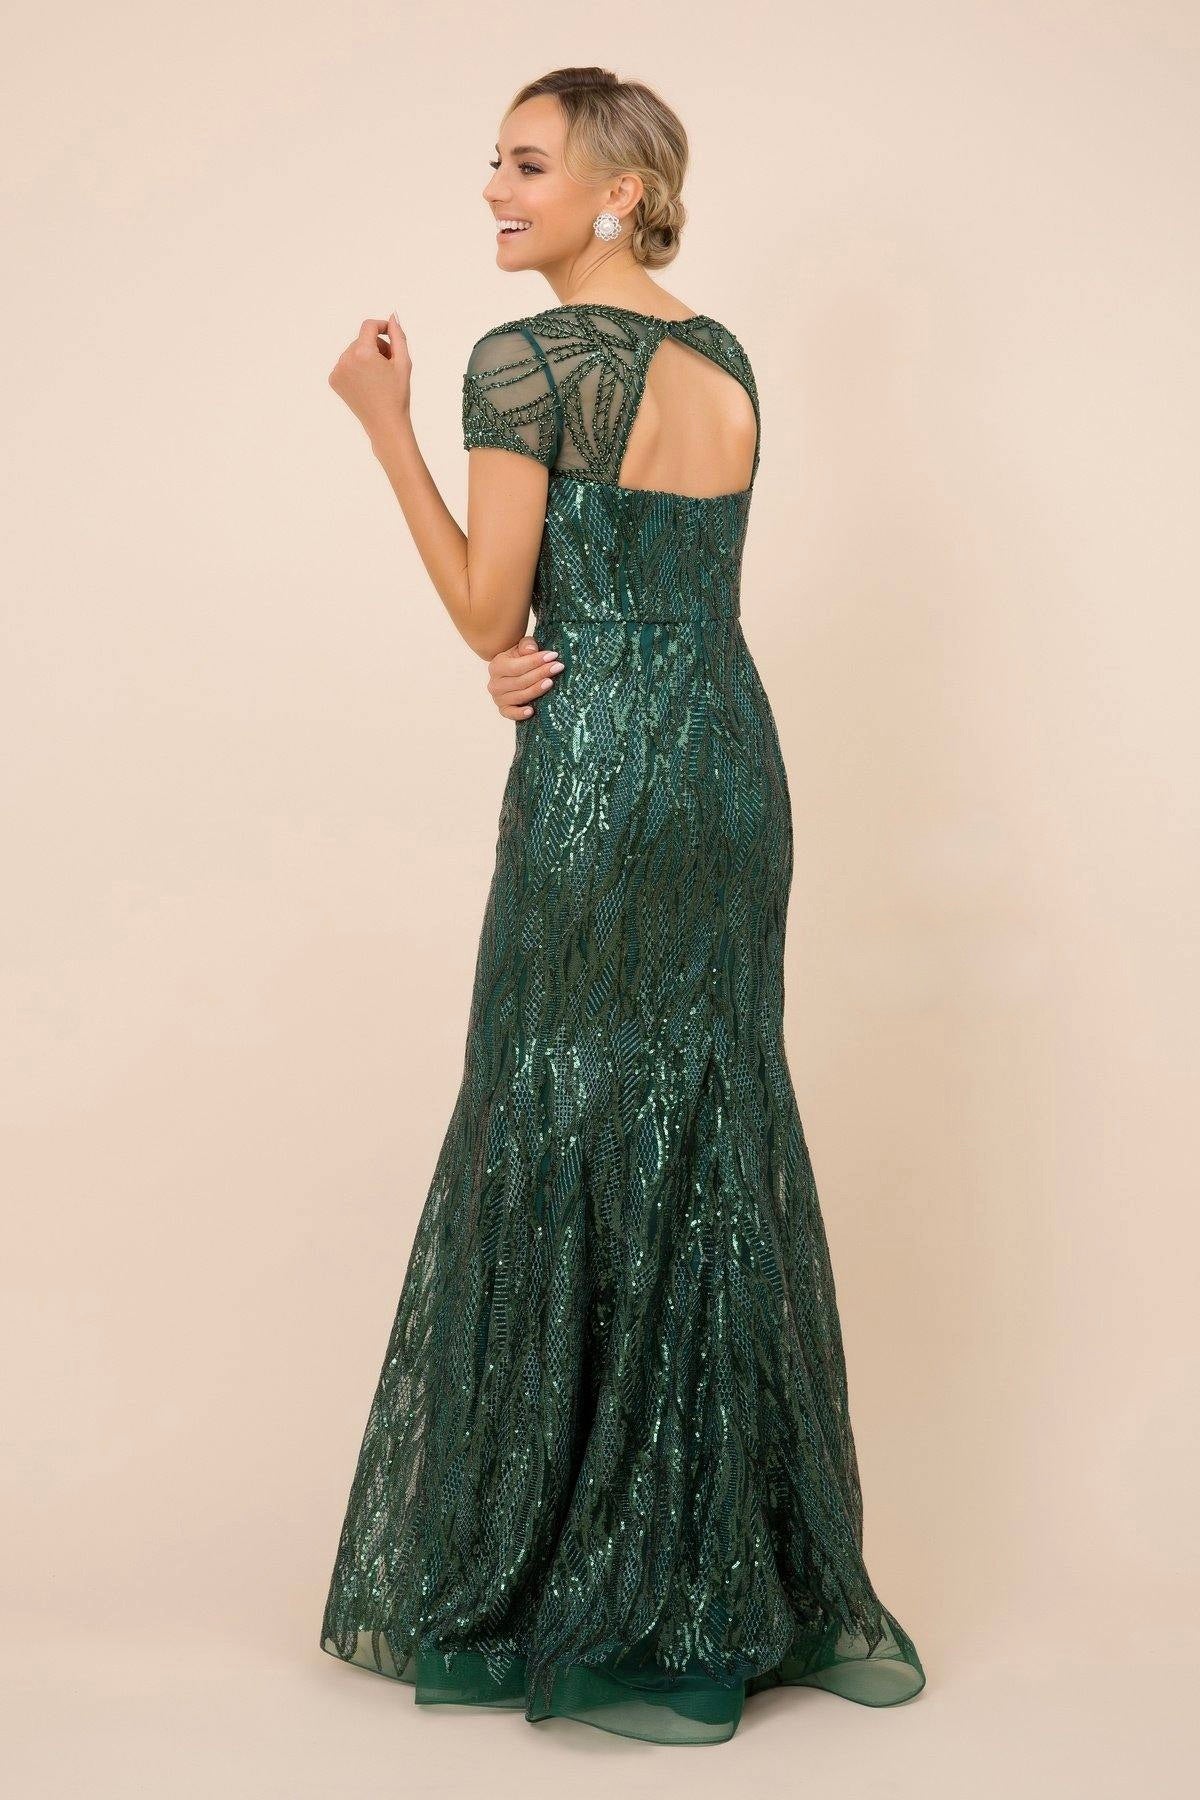 Nox Emerald Embroidered Sequin Evening Gown